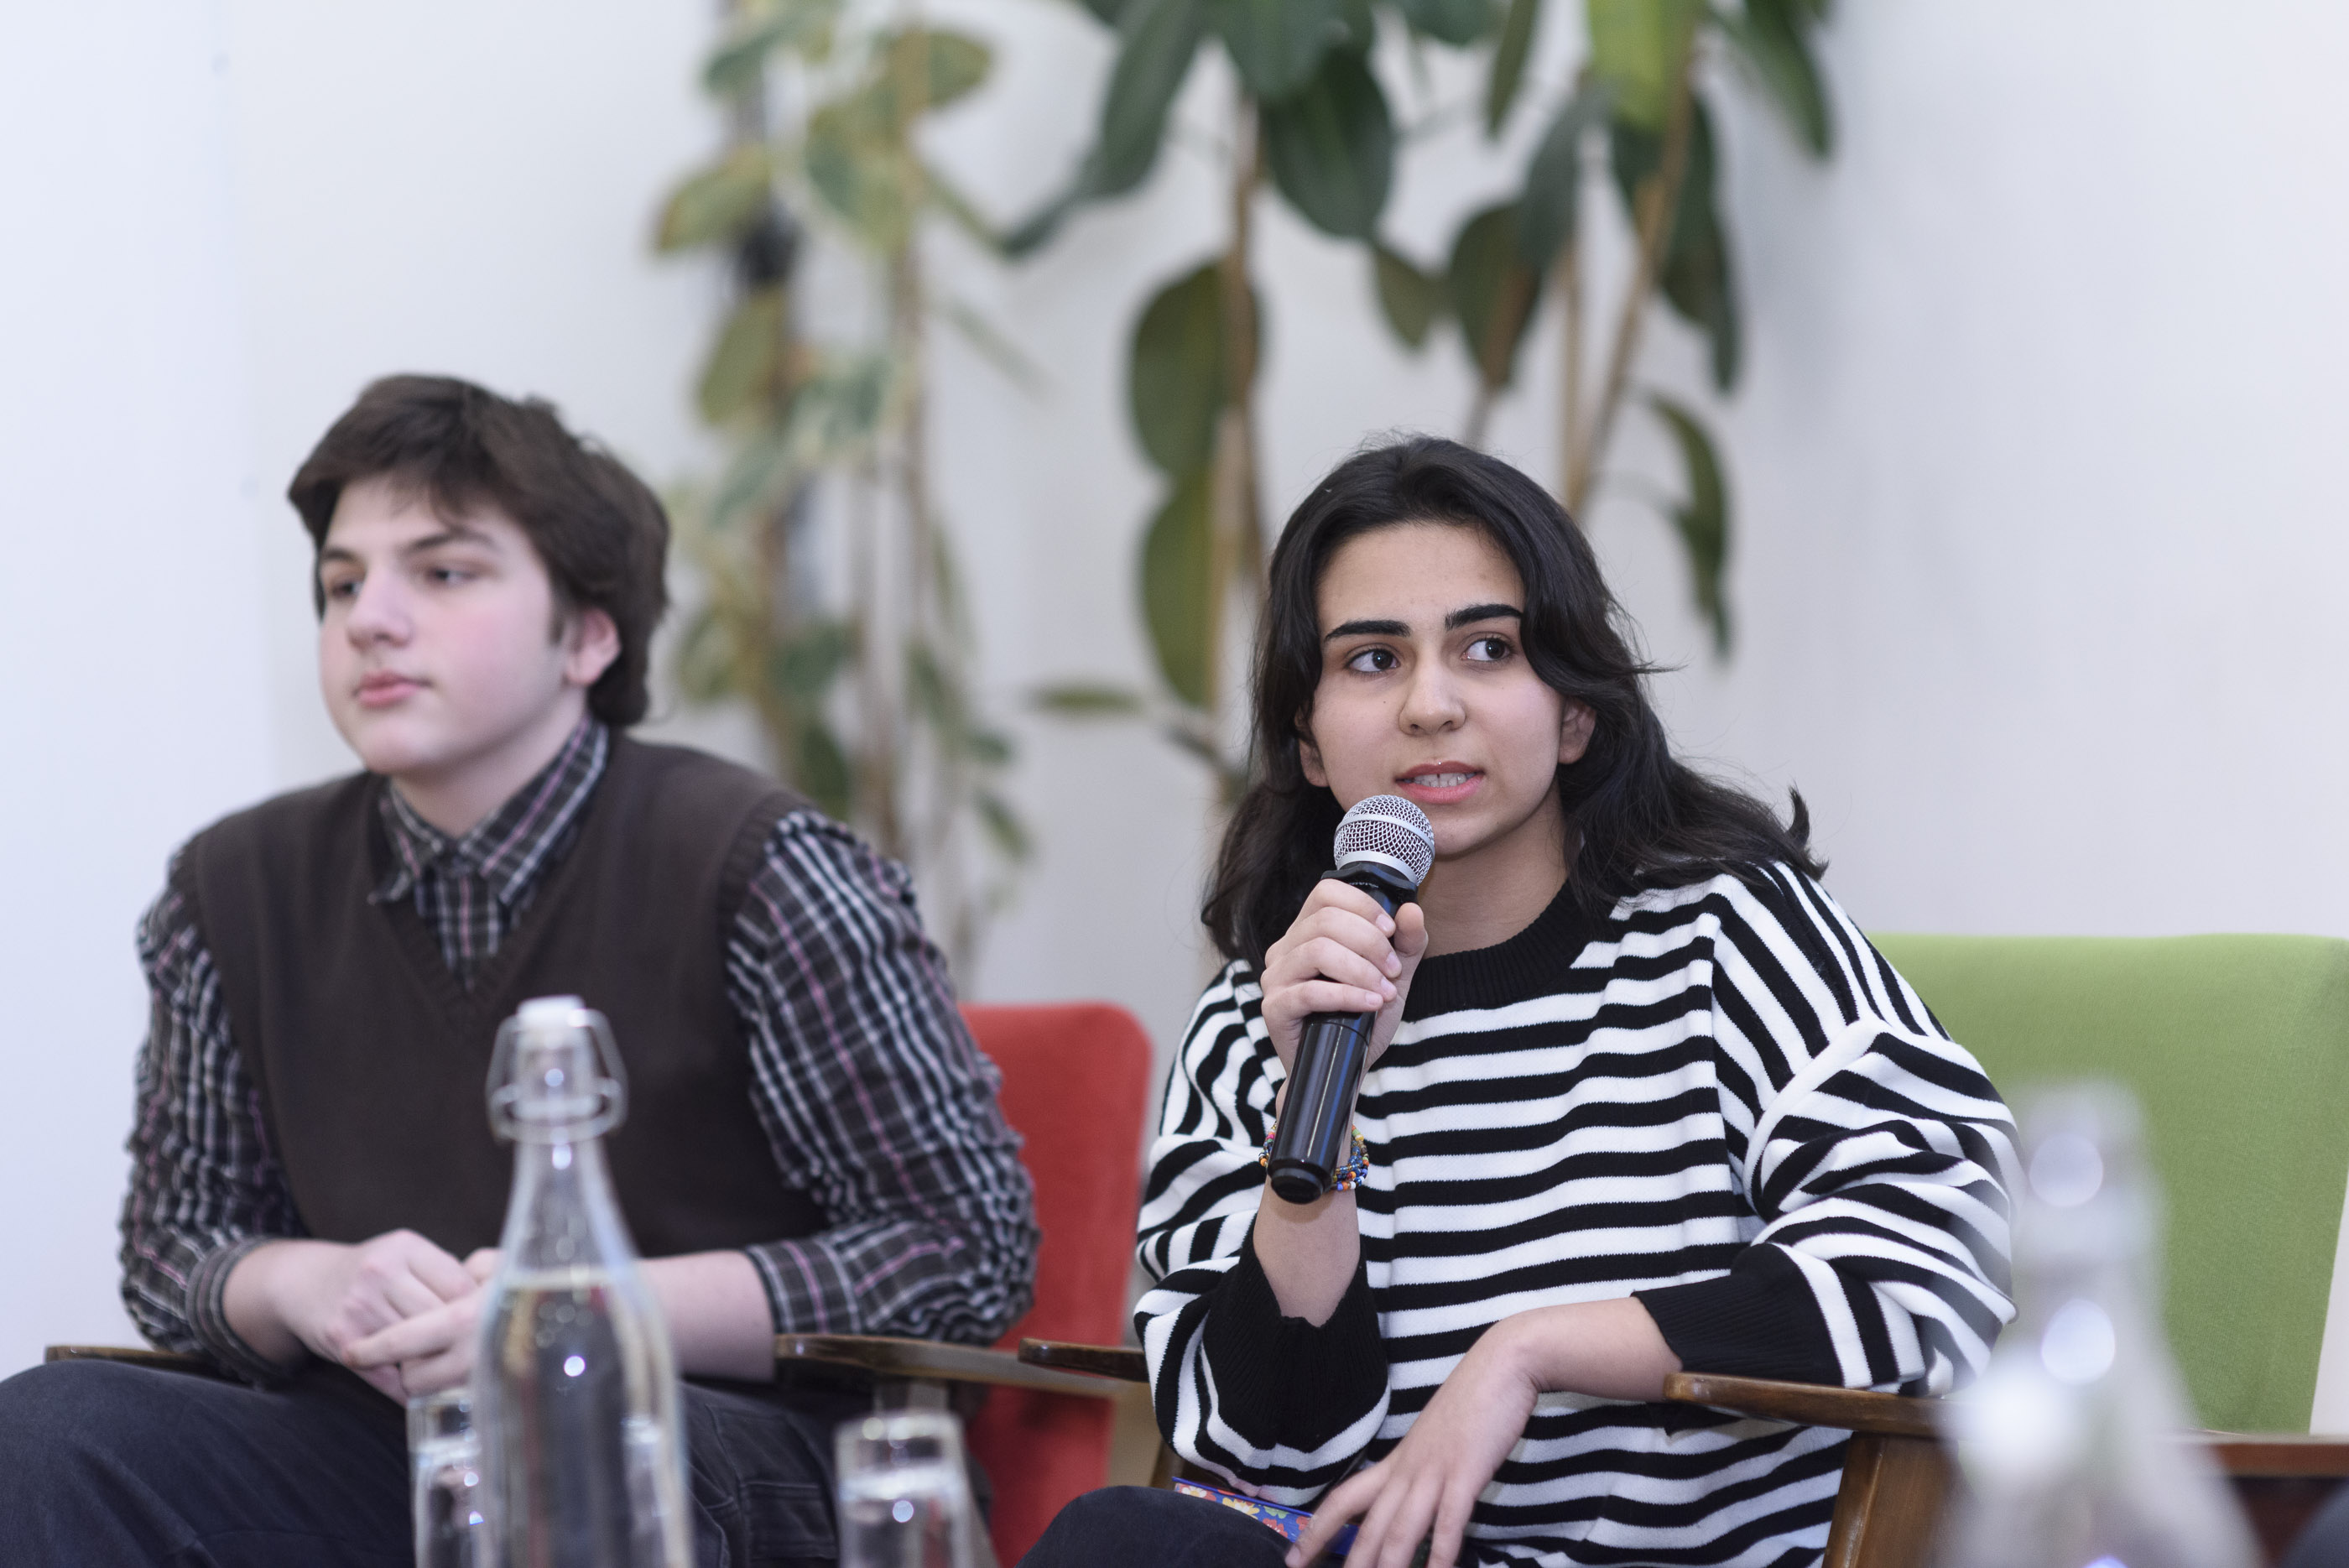 A girl and a boy are sitting. The girl is holding a mic, speaking